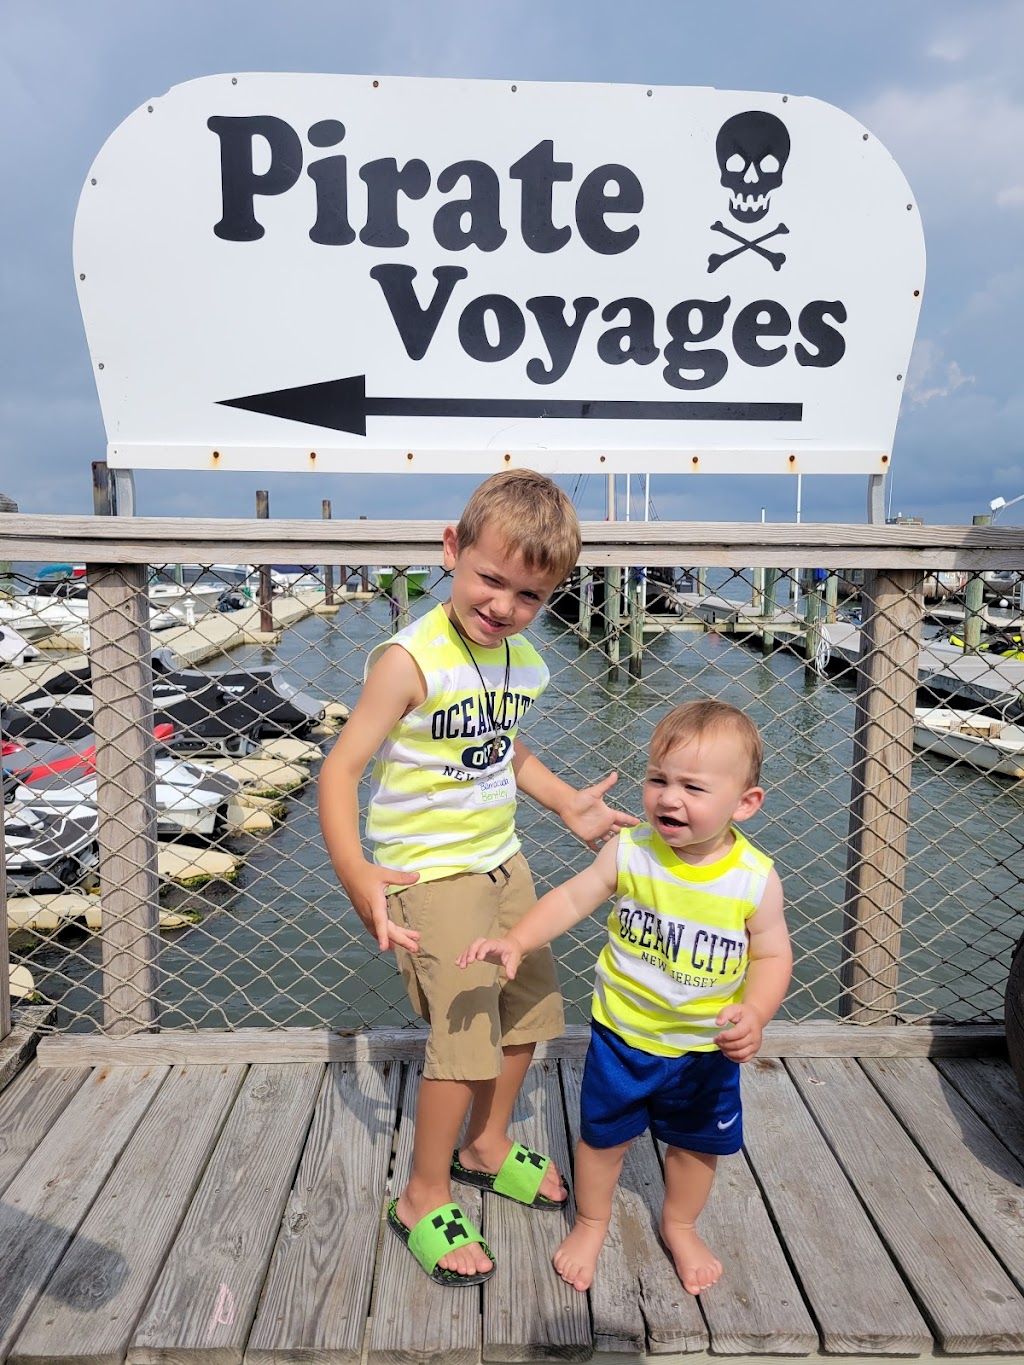 Pirate Voyages | 232 Bay Ave, Ocean City, NJ 08226 | Phone: (609) 398-7555